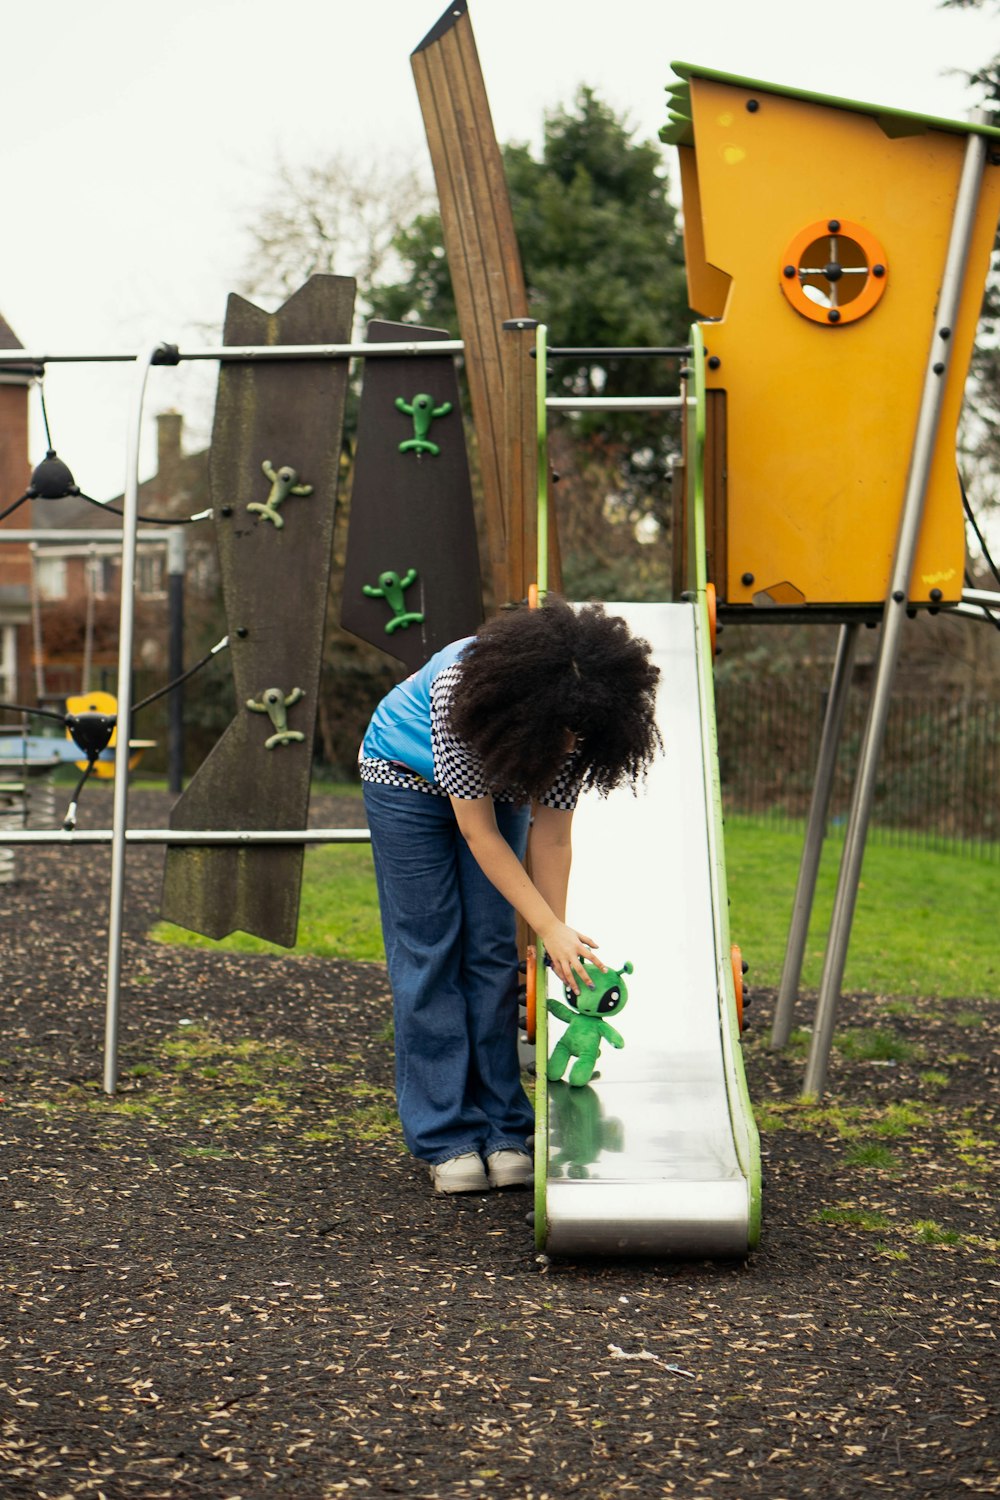 a young girl playing on a slide at a playground